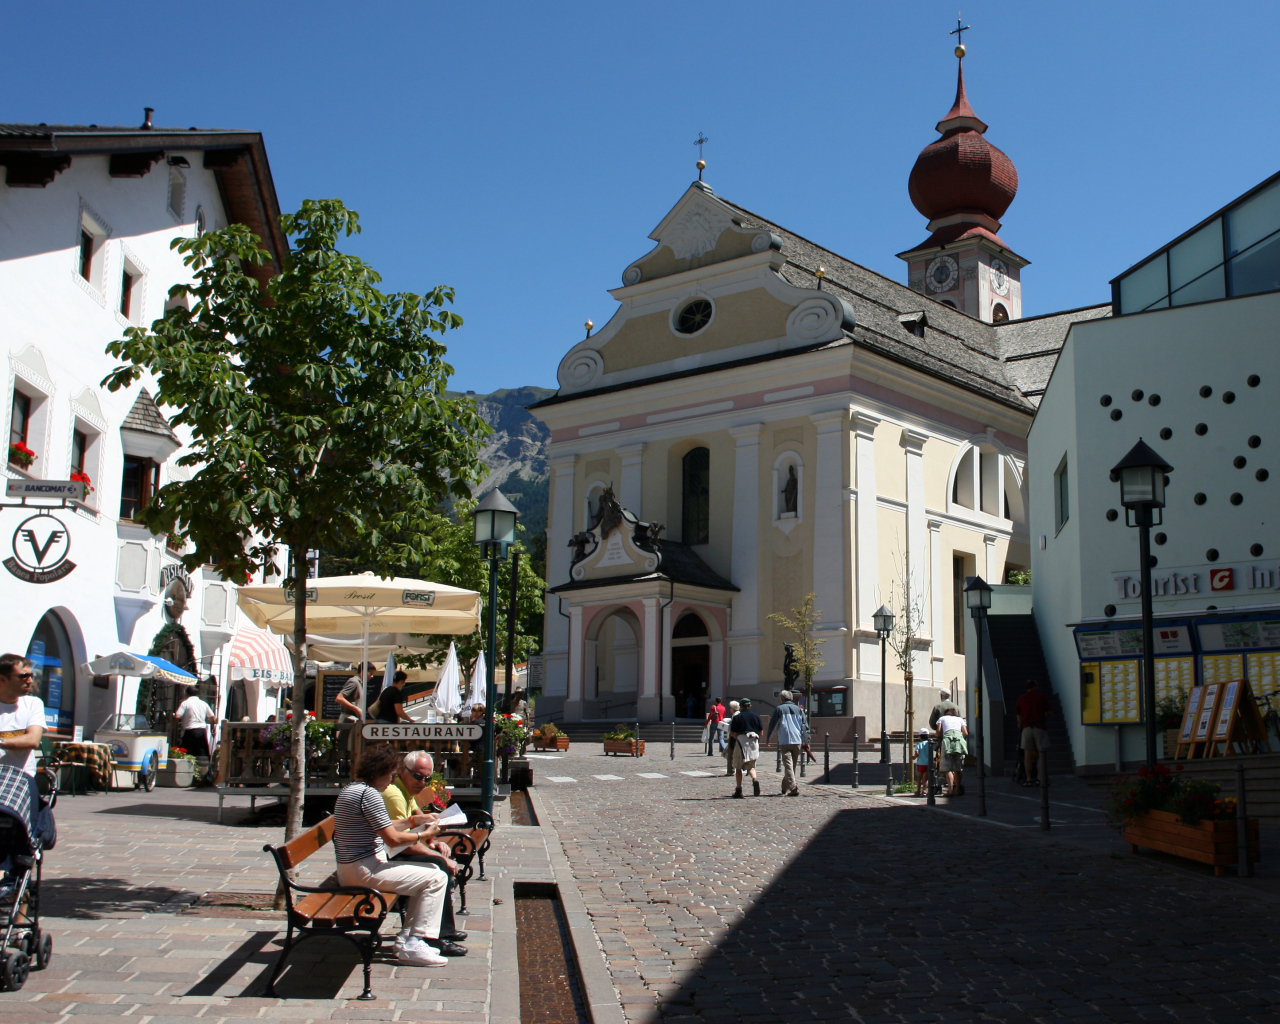 Church on the square in Ortisei, Italy